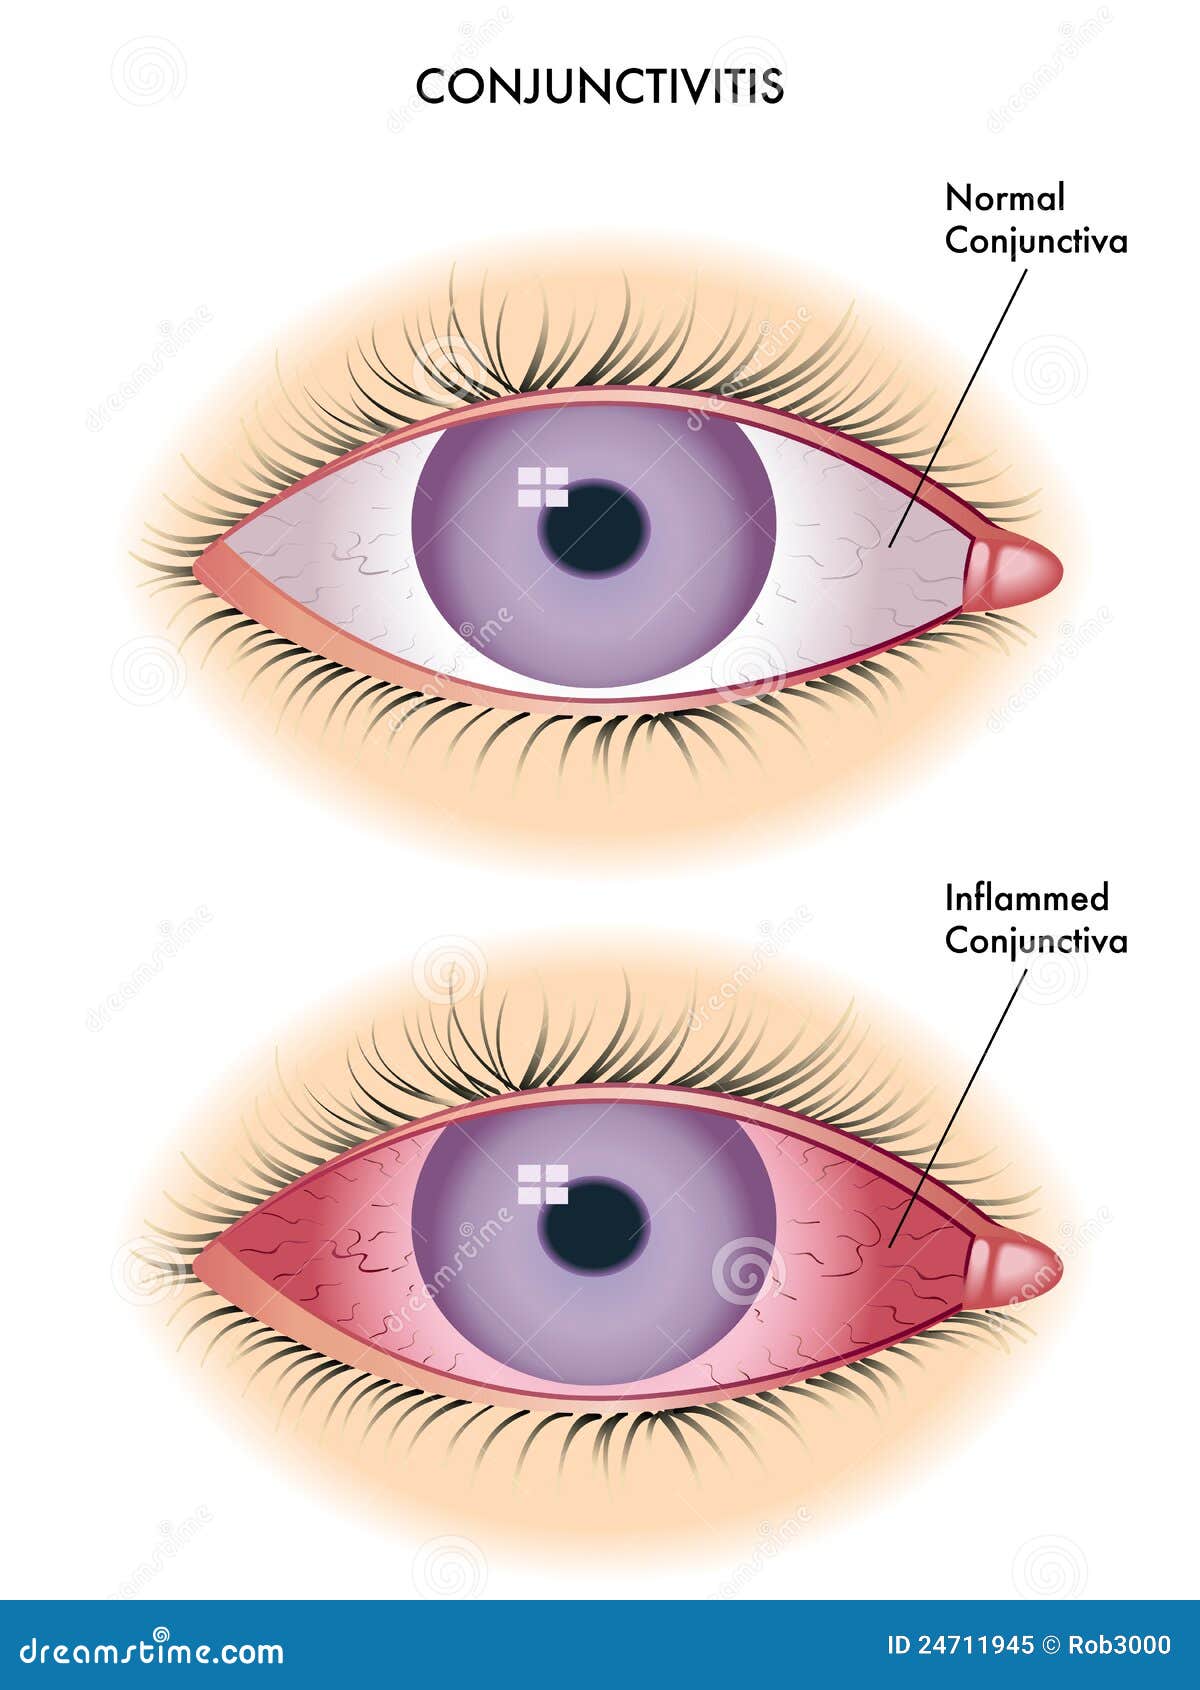 conjunctivitis, also known as pink eye - WebMD